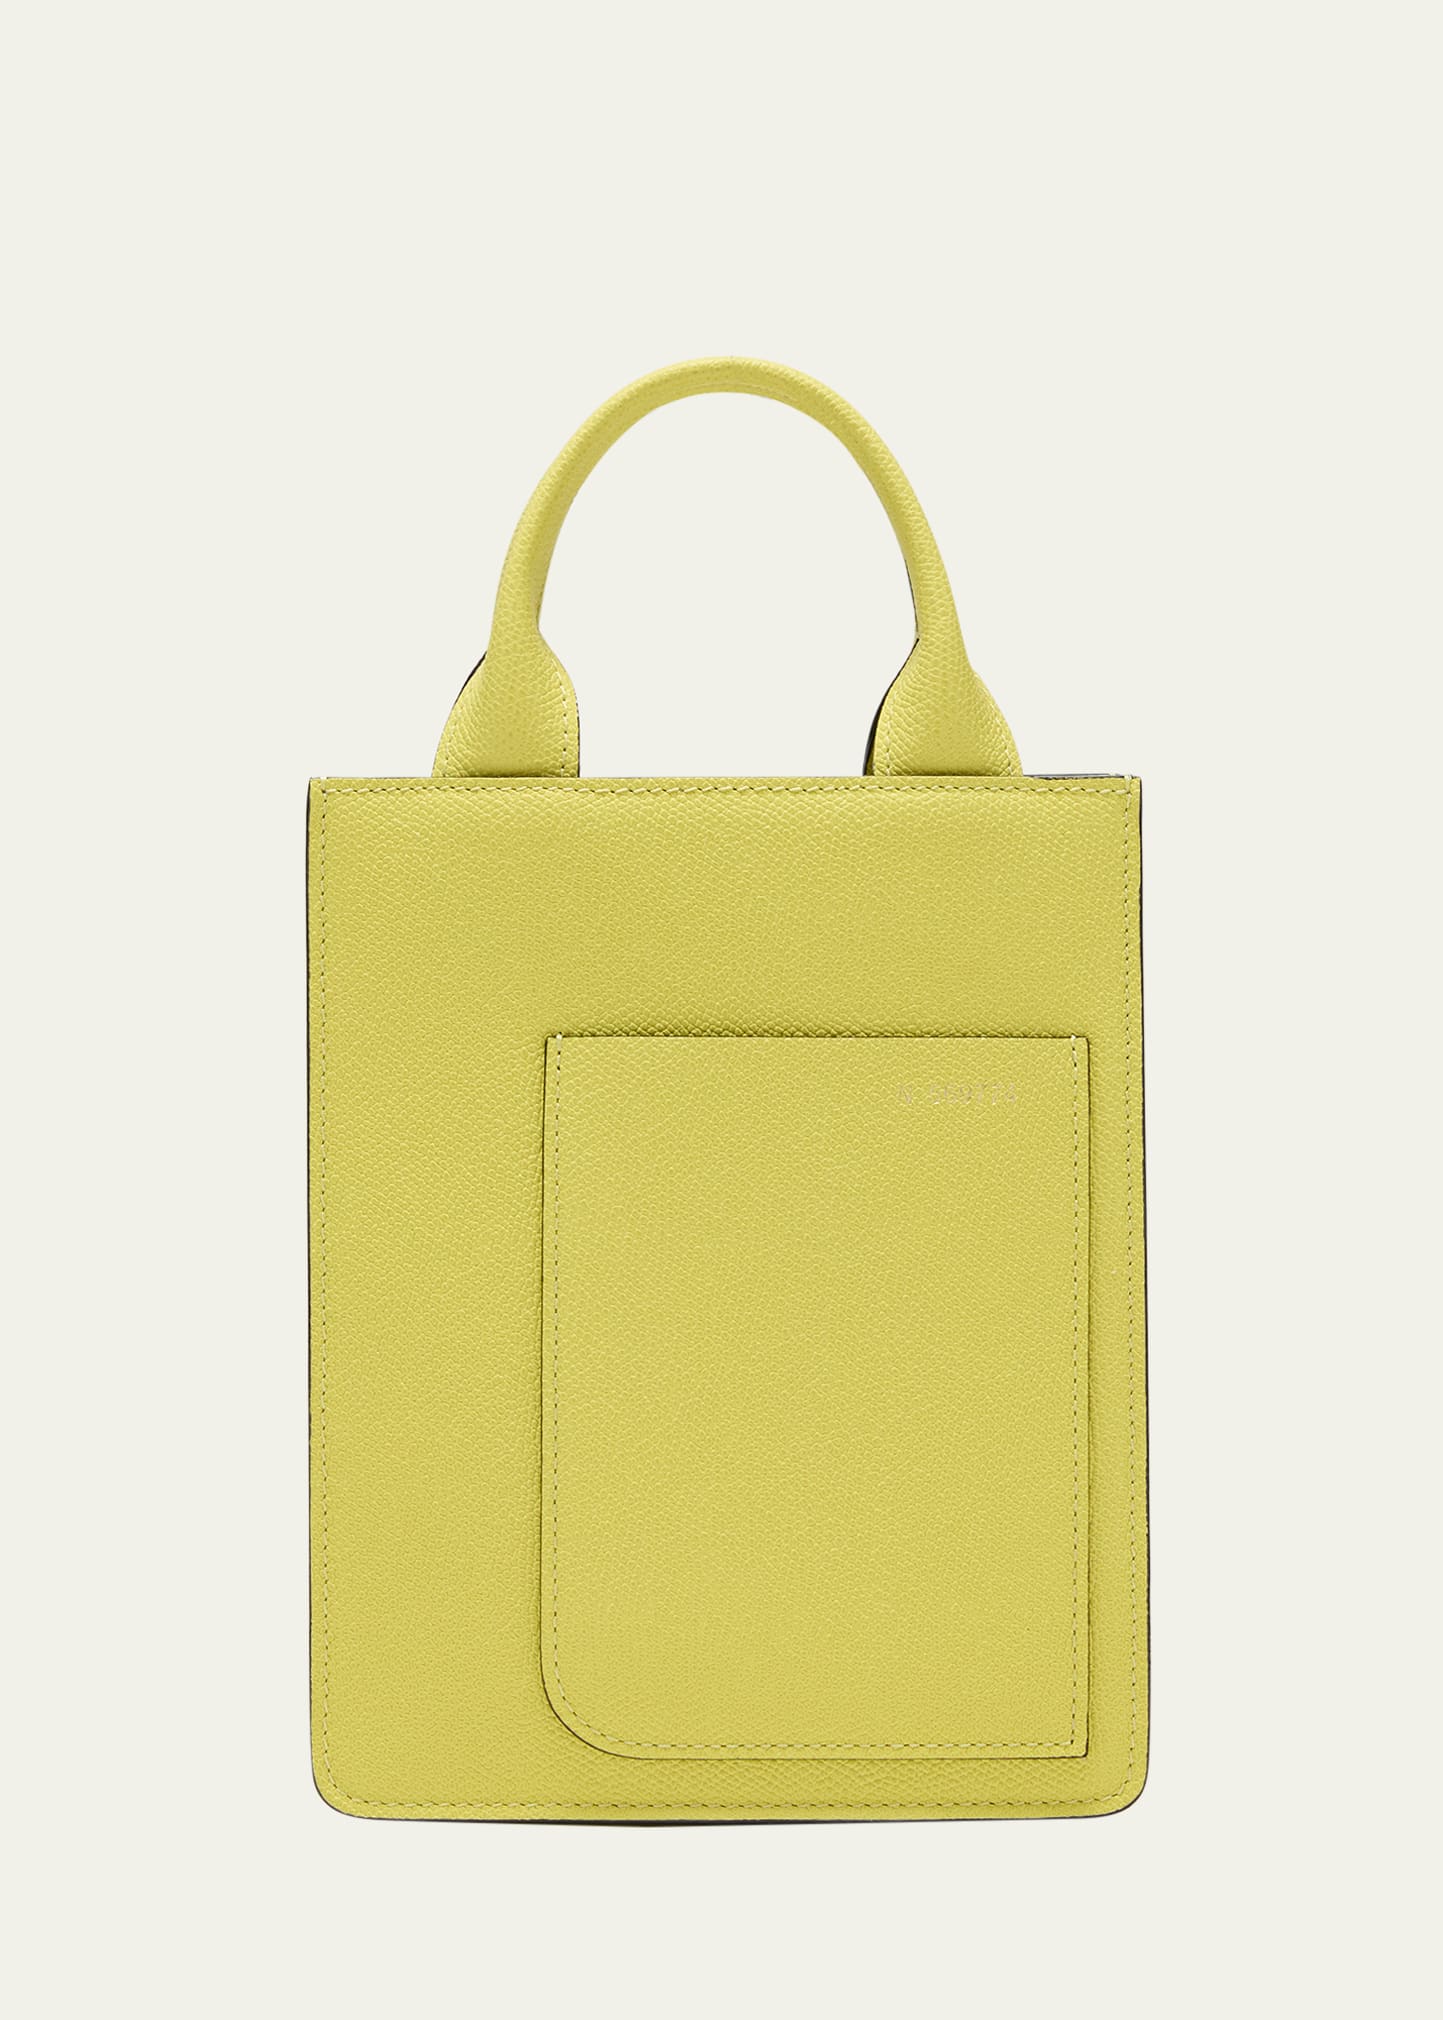 Valextra Mini Boxy Leather Top-handle Bag In Jc Citrino